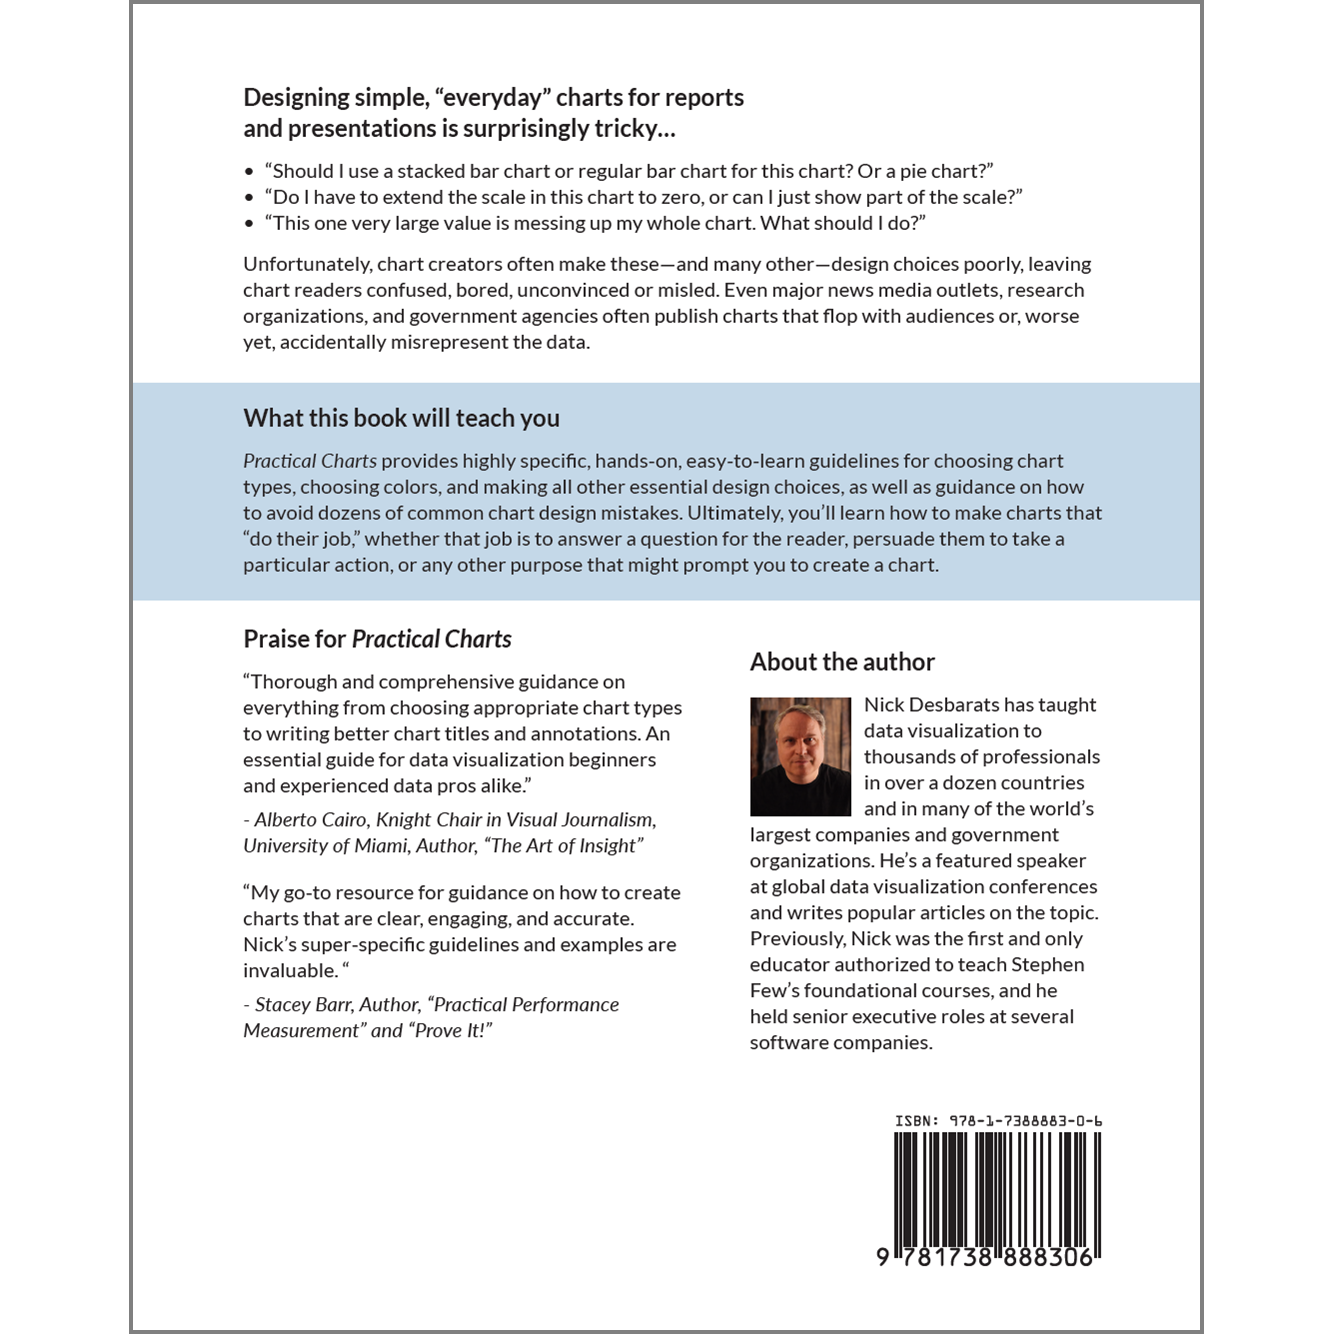 Practical Charts (paperback edition) US AND CANADIAN CUSTOMERS ONLY